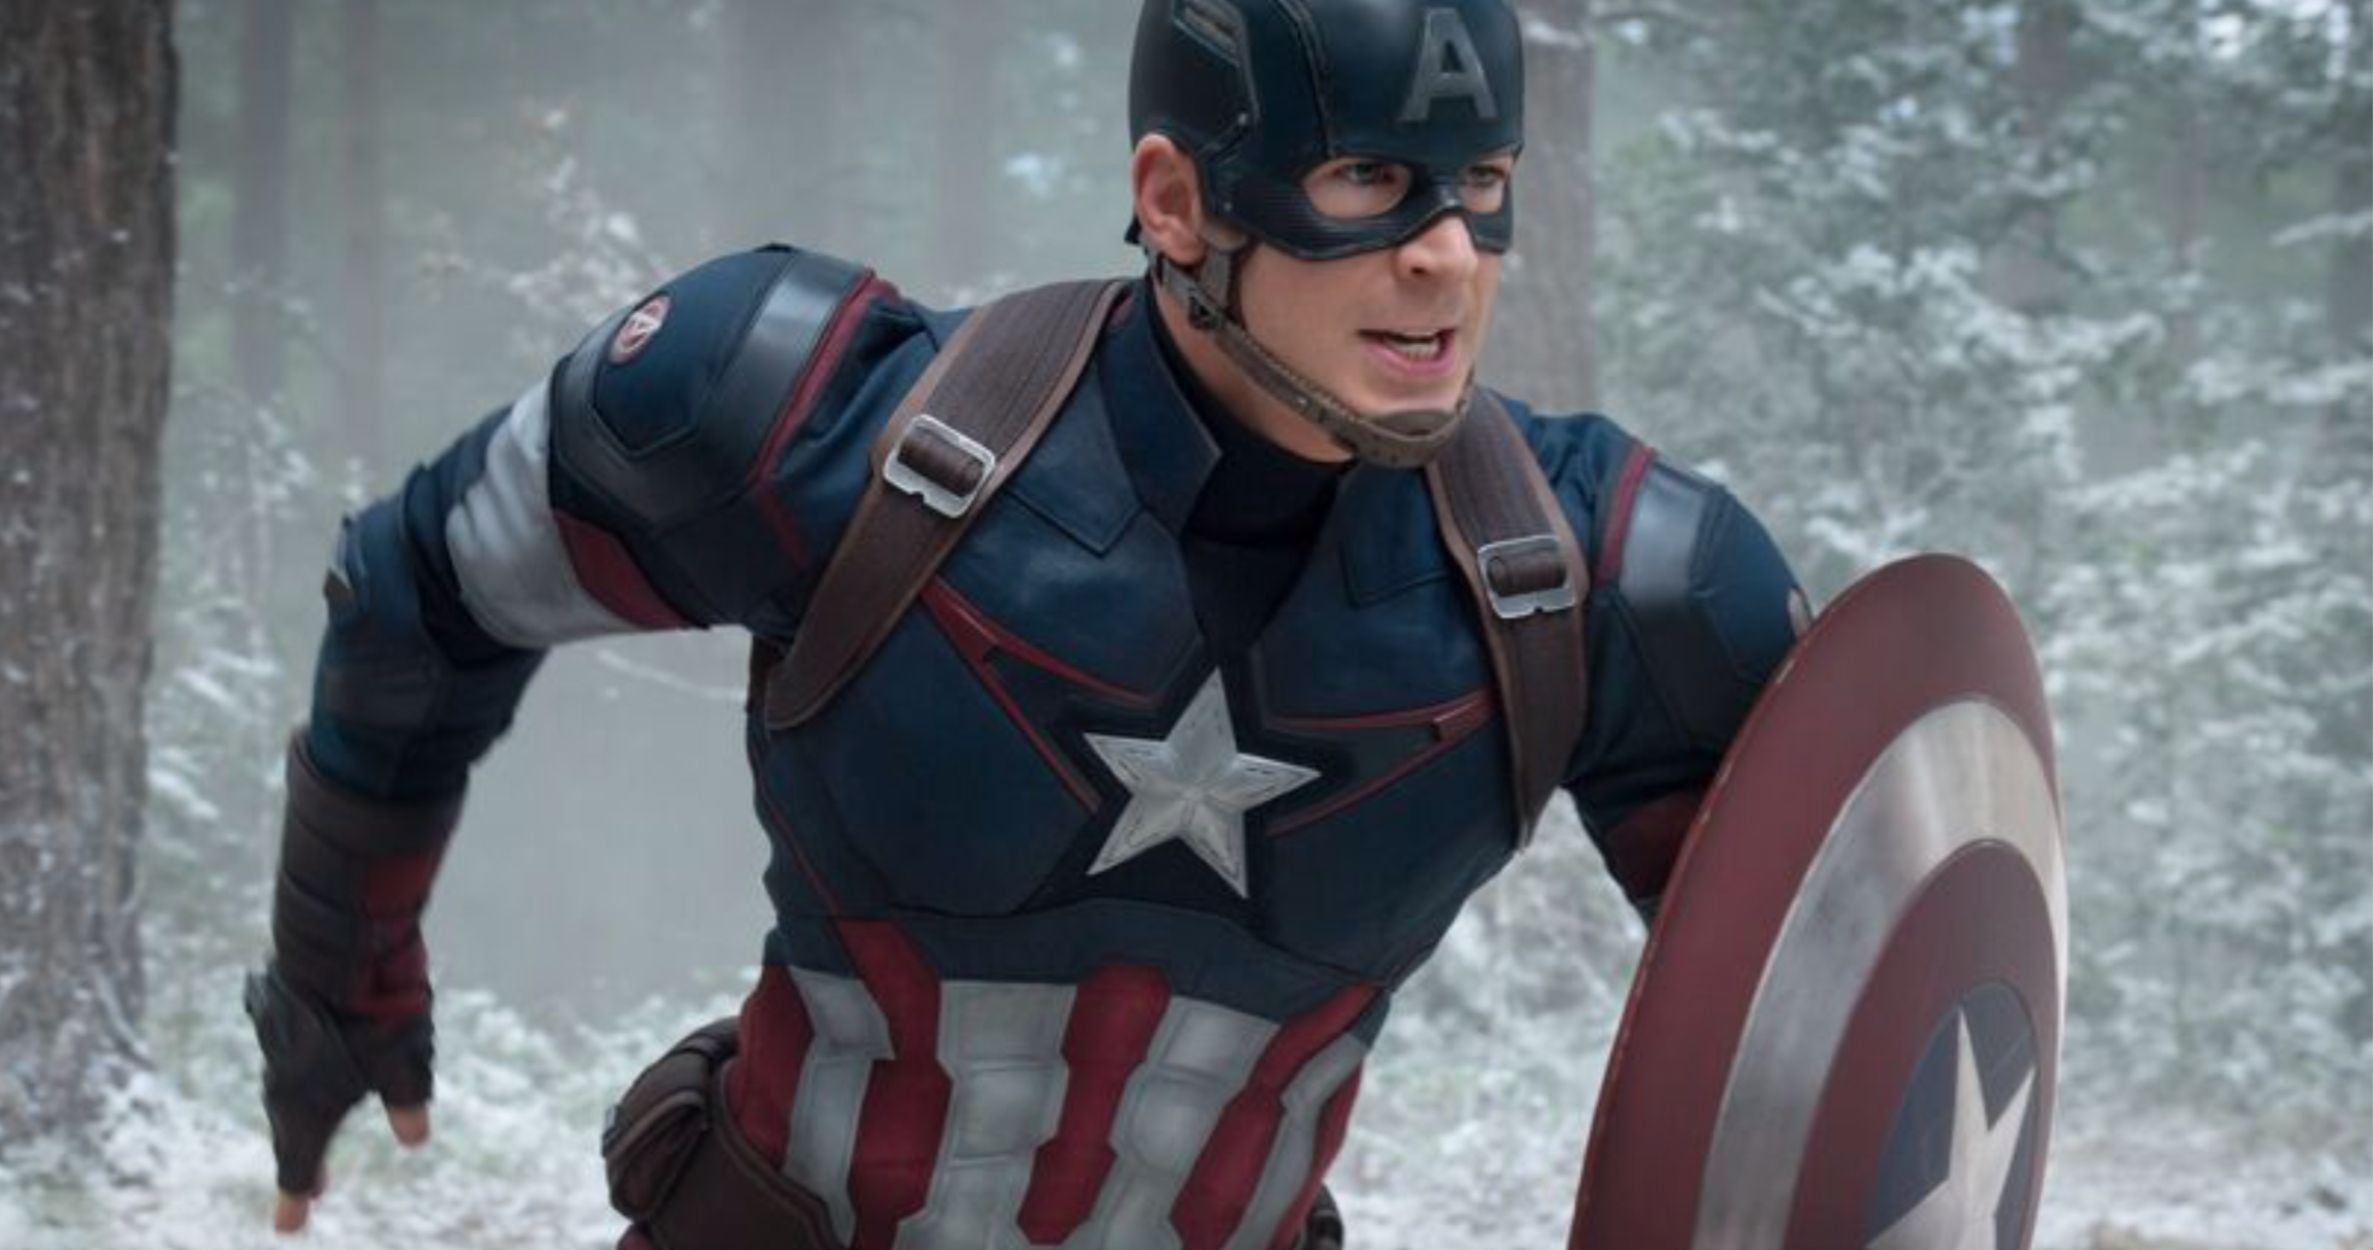 Chris Evans Promises Captain America Shield to Hero Boy Who Saved Sister from Dog Attack